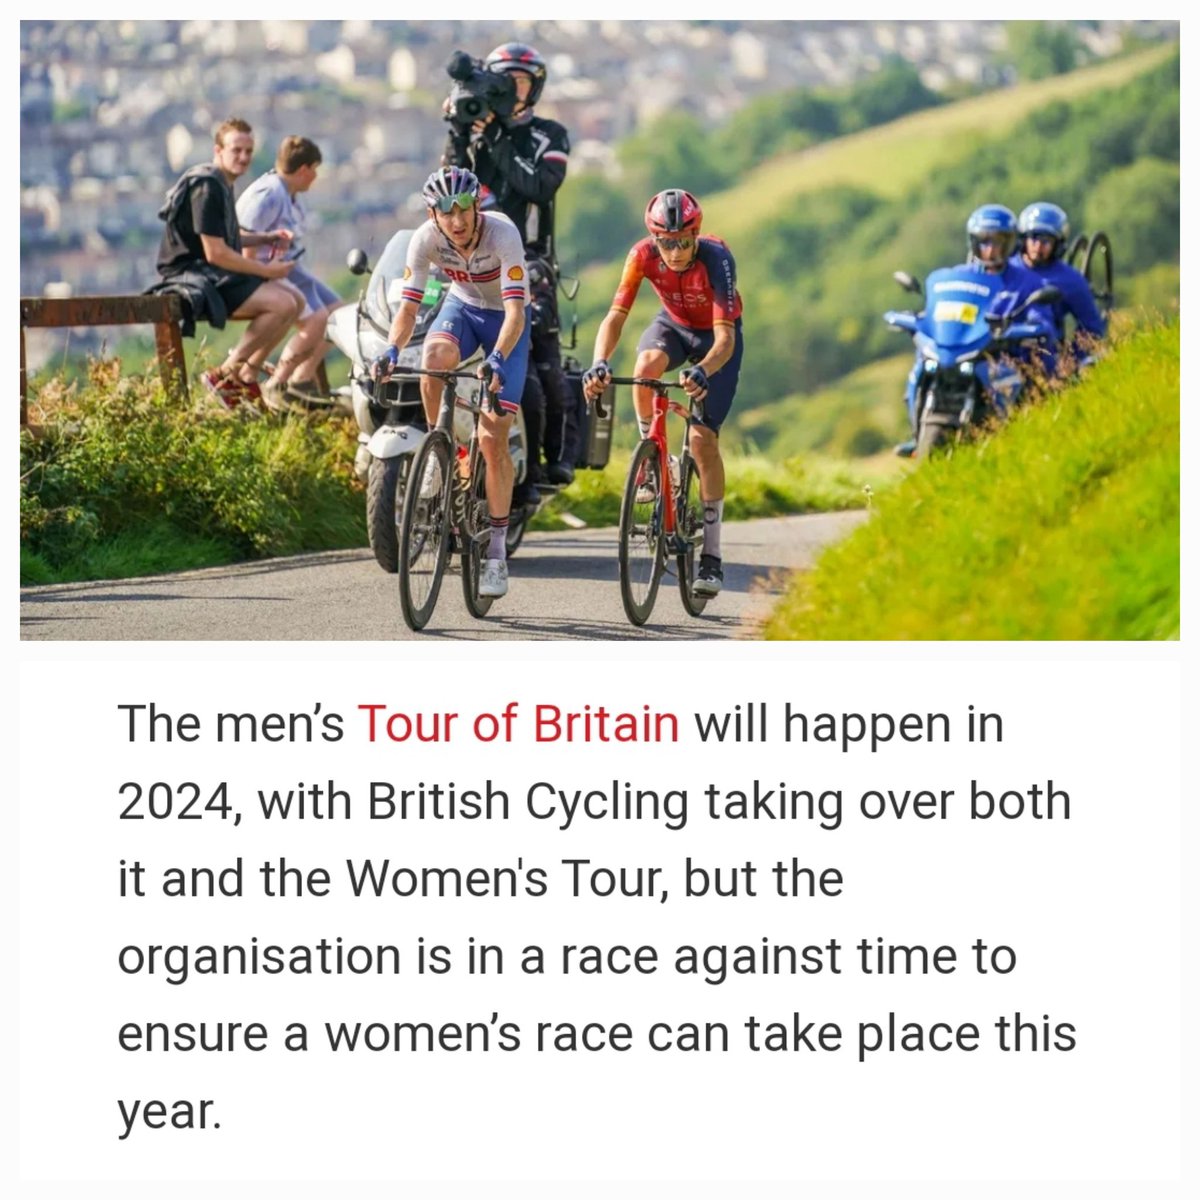 British Cycling Events saves the Men's and Women's Tour of Britain from the loss of SweetSpot sponsorship. 
#cycling #cyclinglife #tourofbritain #bicycle #roadbike #uci